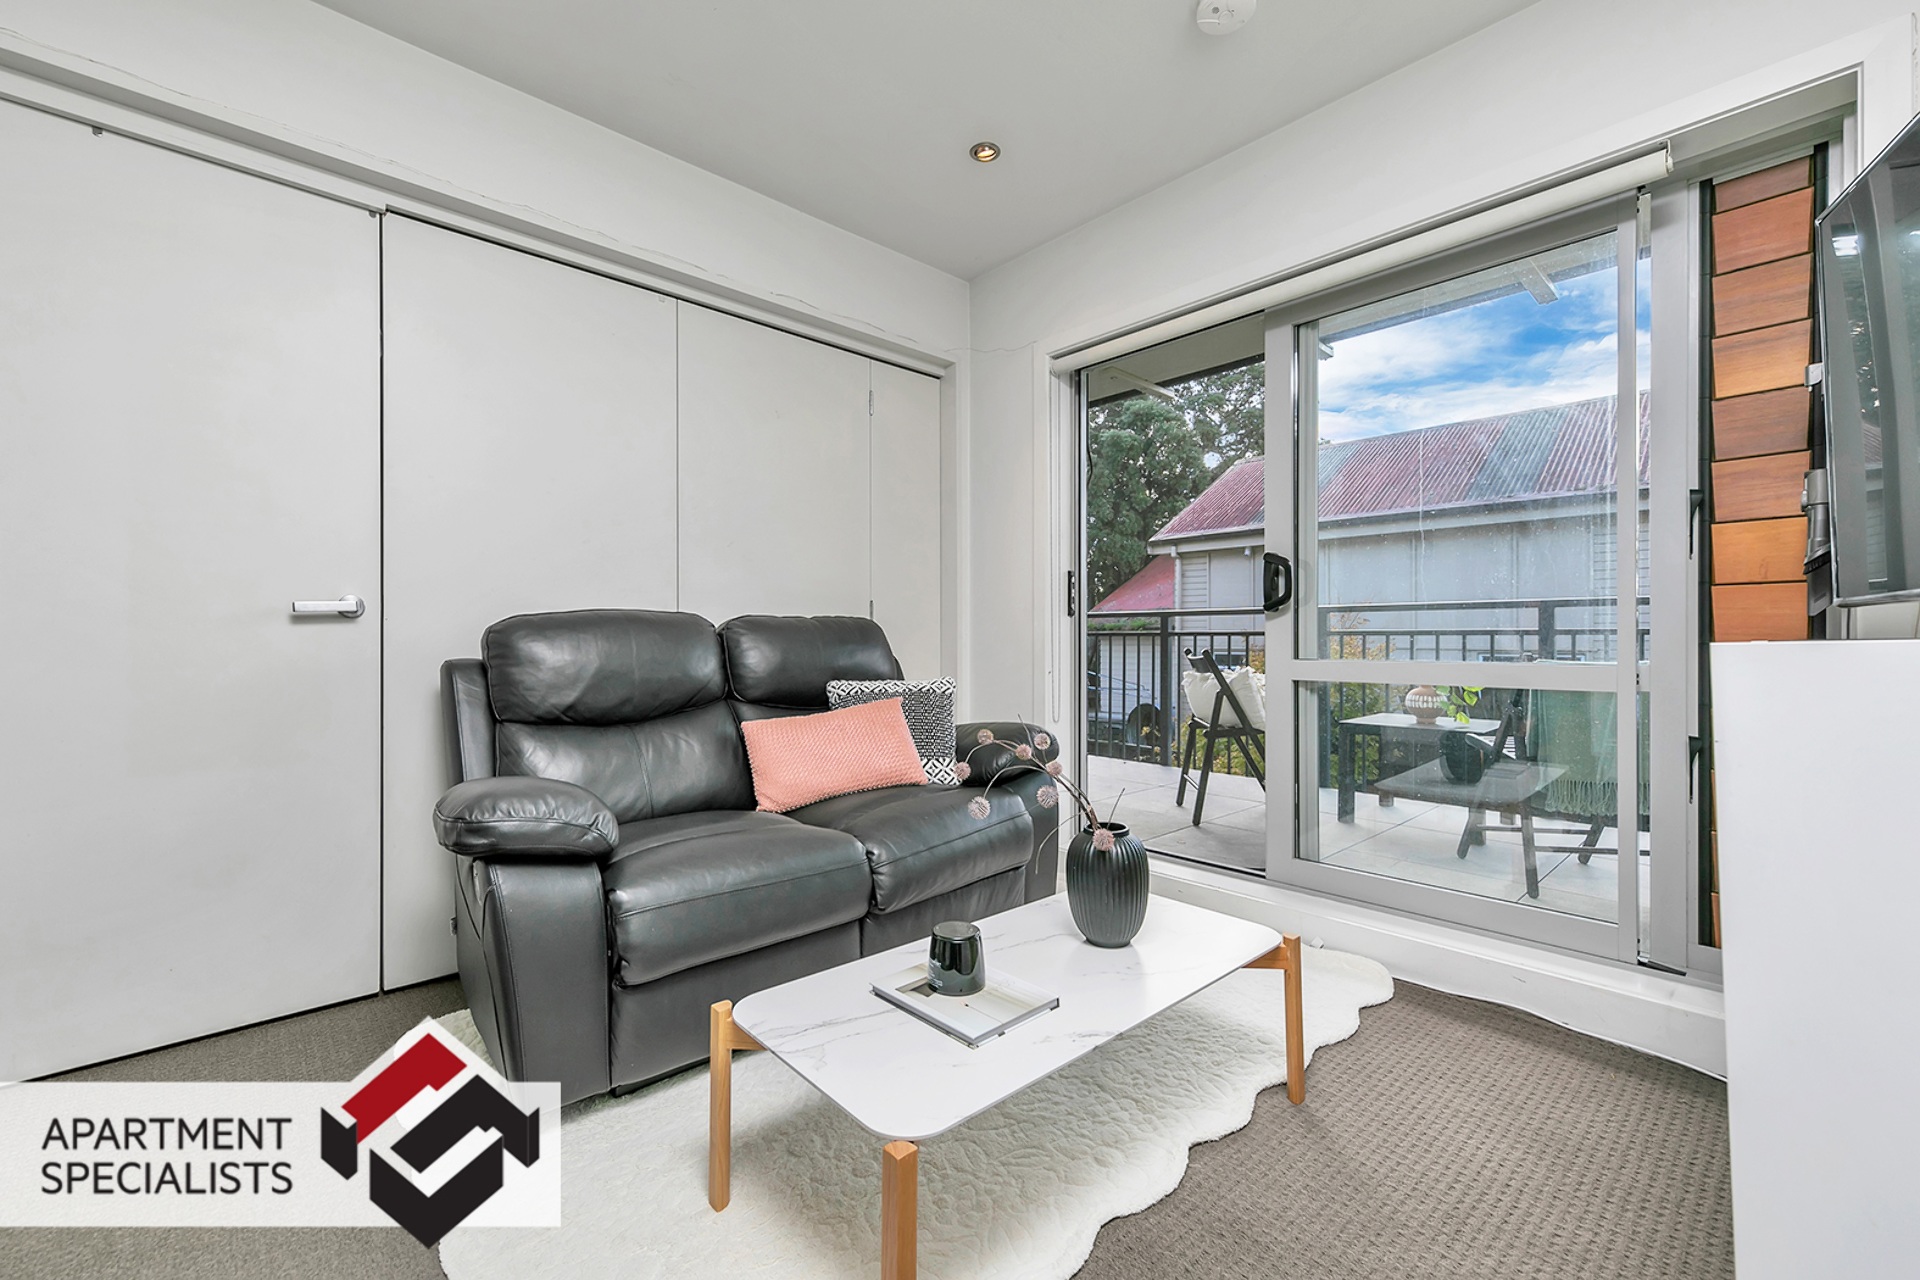 4 | 71 Spencer Road, Albany | Apartment Specialists